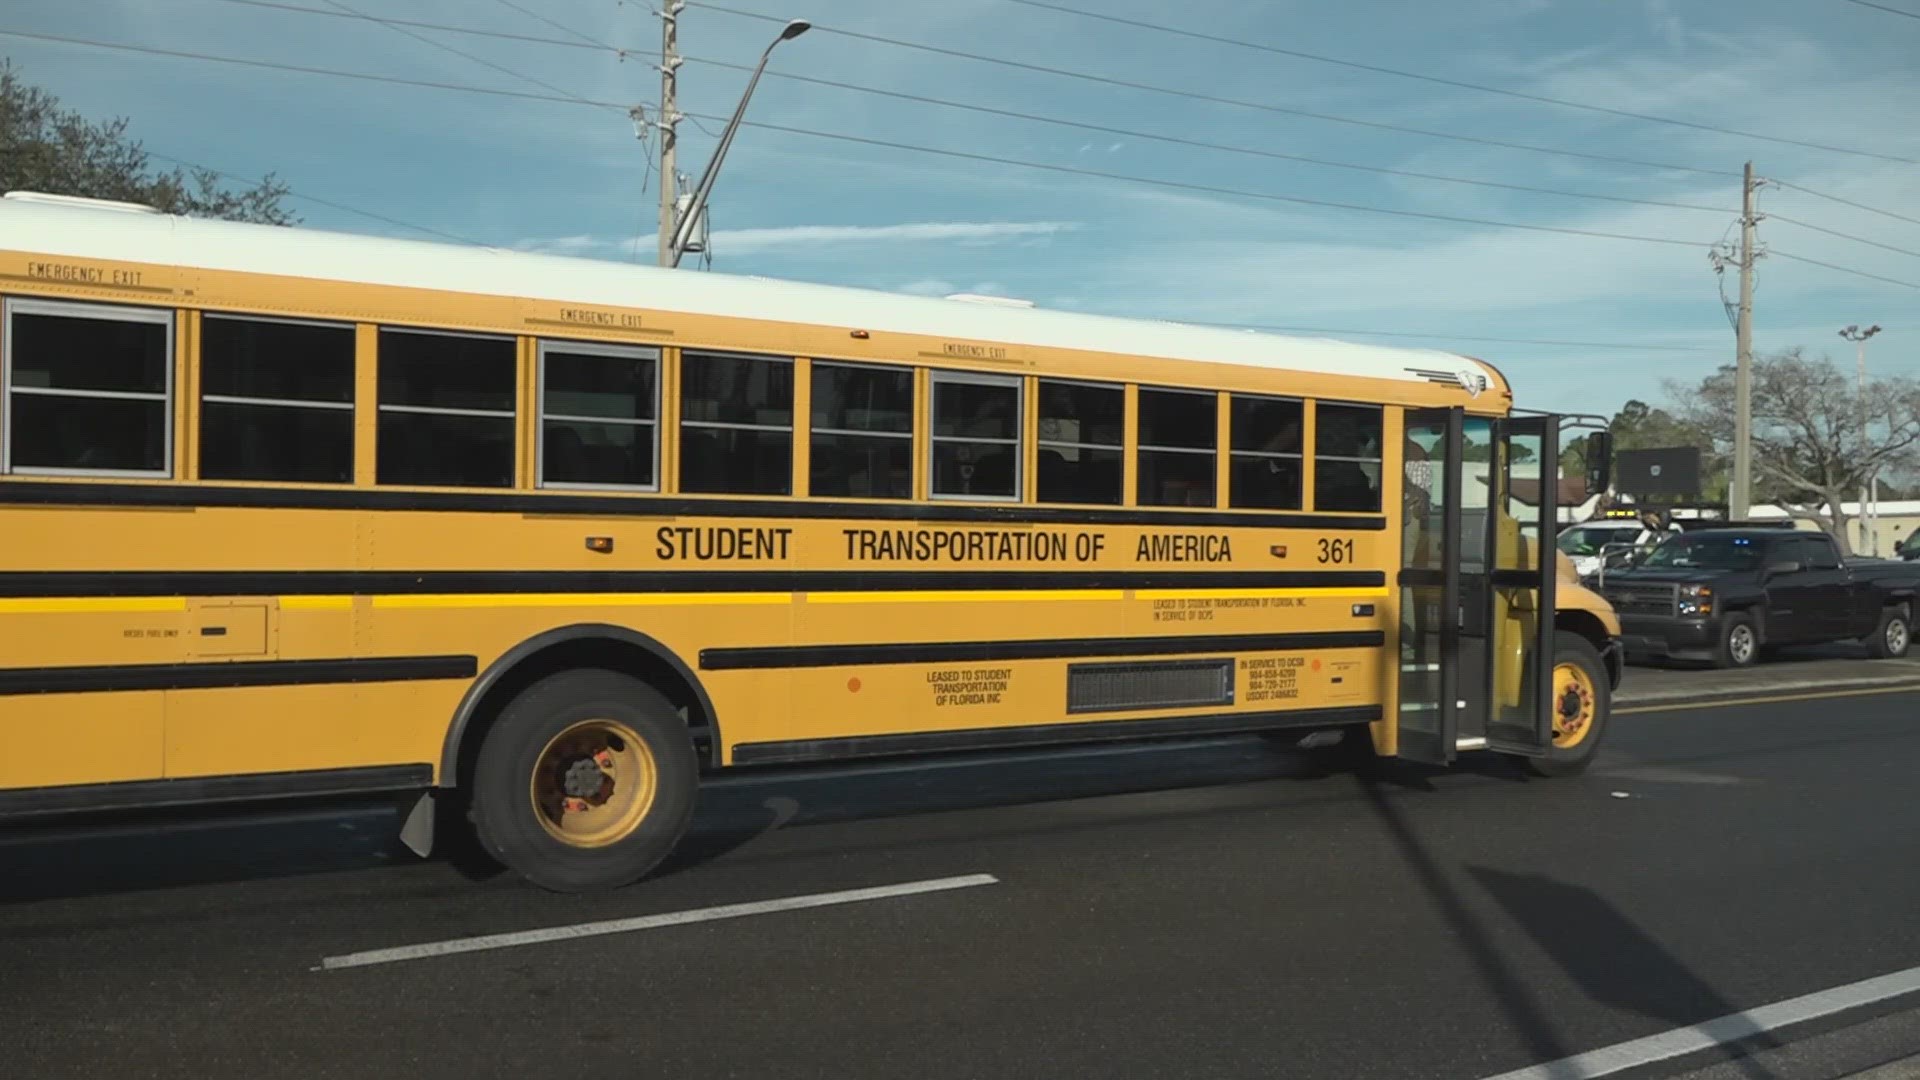 A 60-year-old man is dead after he was hit by a school bus in the Mayport area of Jacksonville Friday morning, according to the Jacksonville Sheriff's Office.